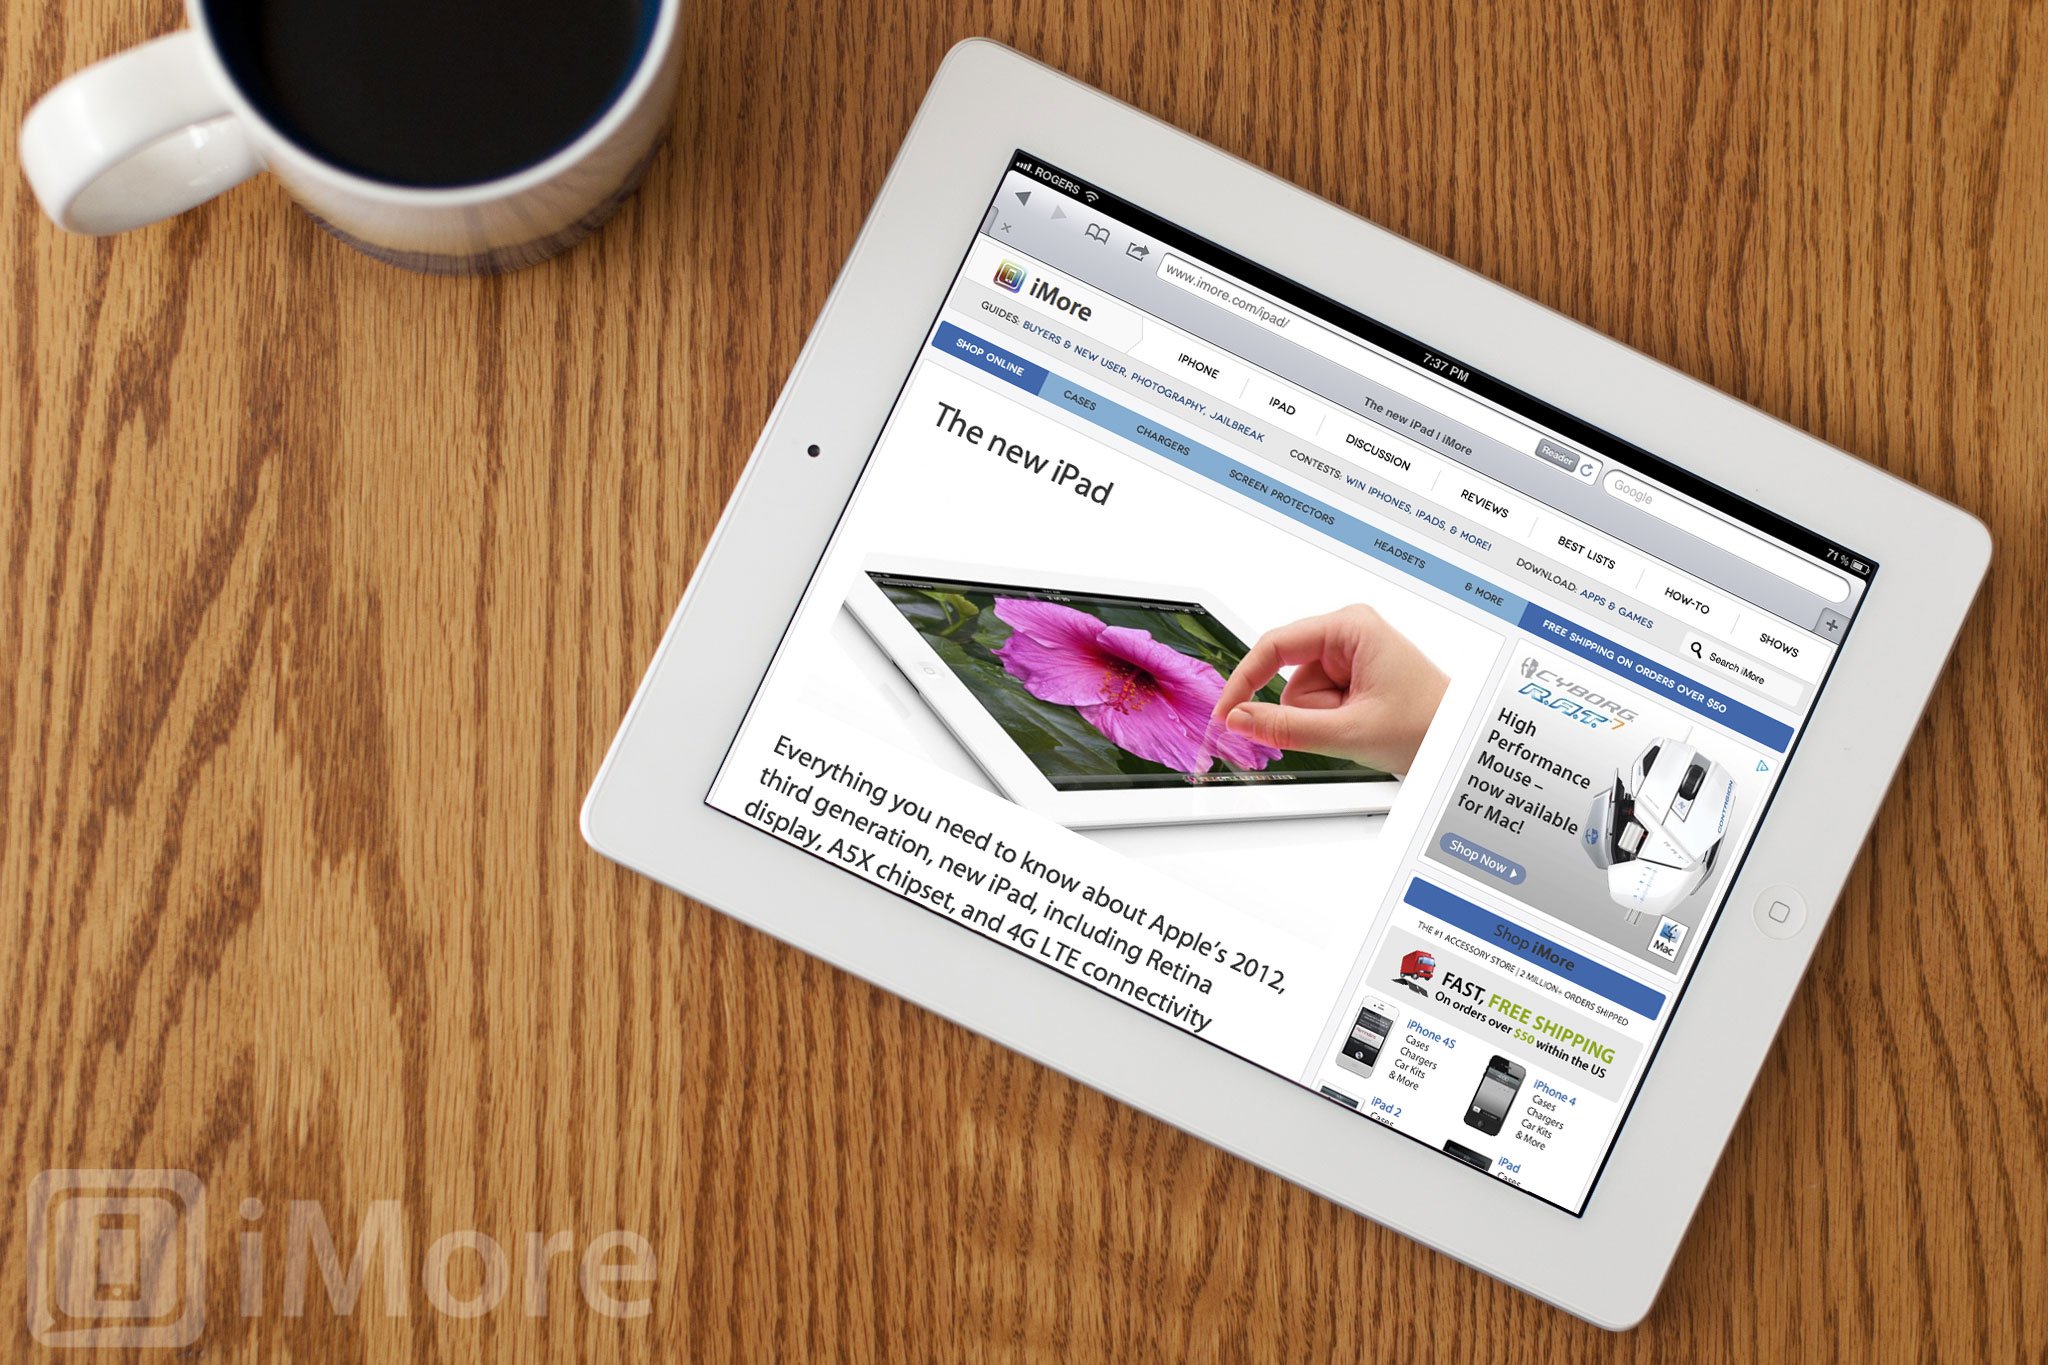 2012 iPad buyers guide: Everything you need to know before buying the new iPad, including how to pick your model, storage capacity, color, and 3G or 4G LTE carrier!